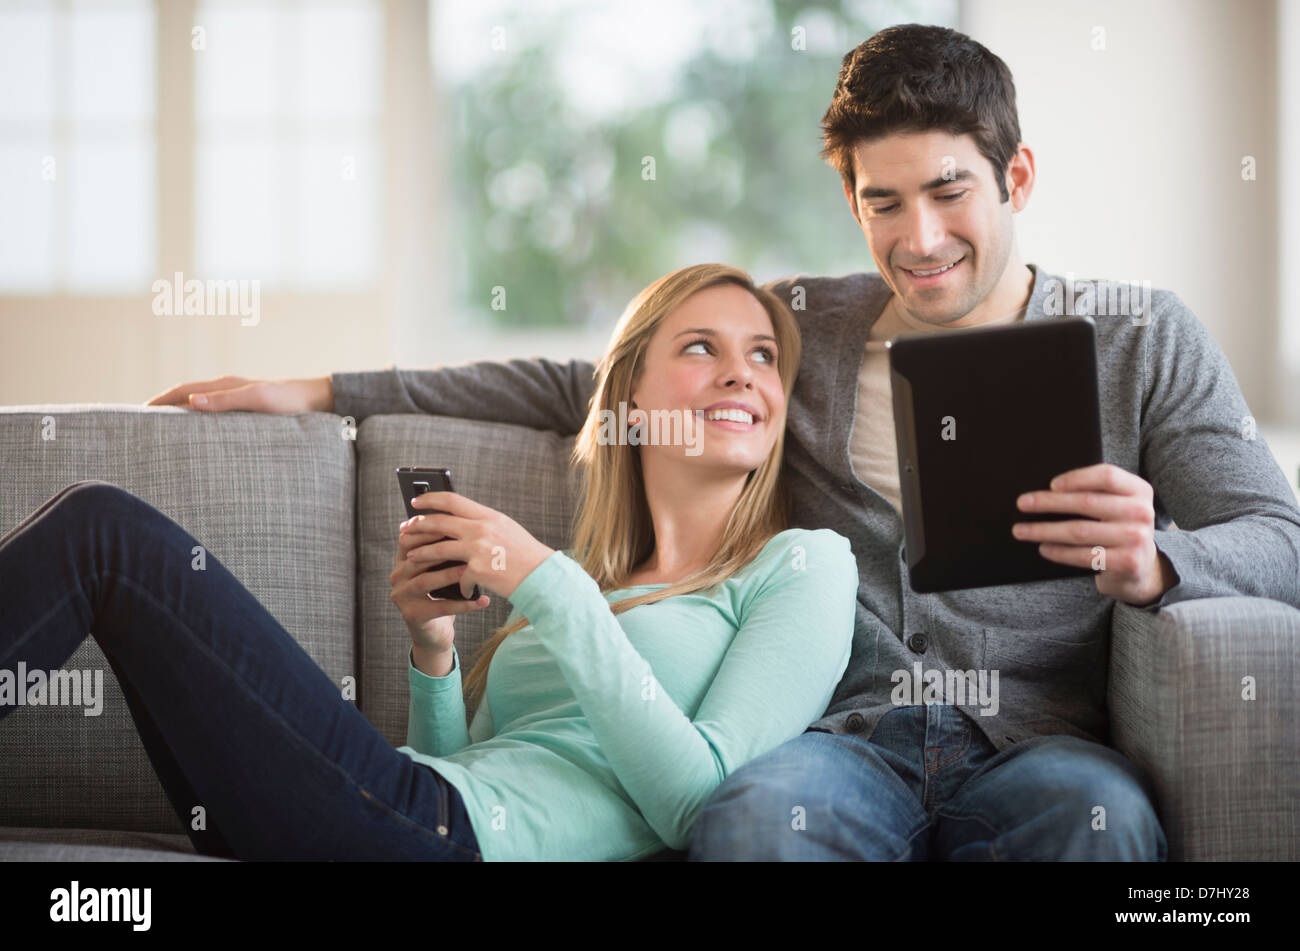 Couple using tablet pc and smartphone Stock Photo